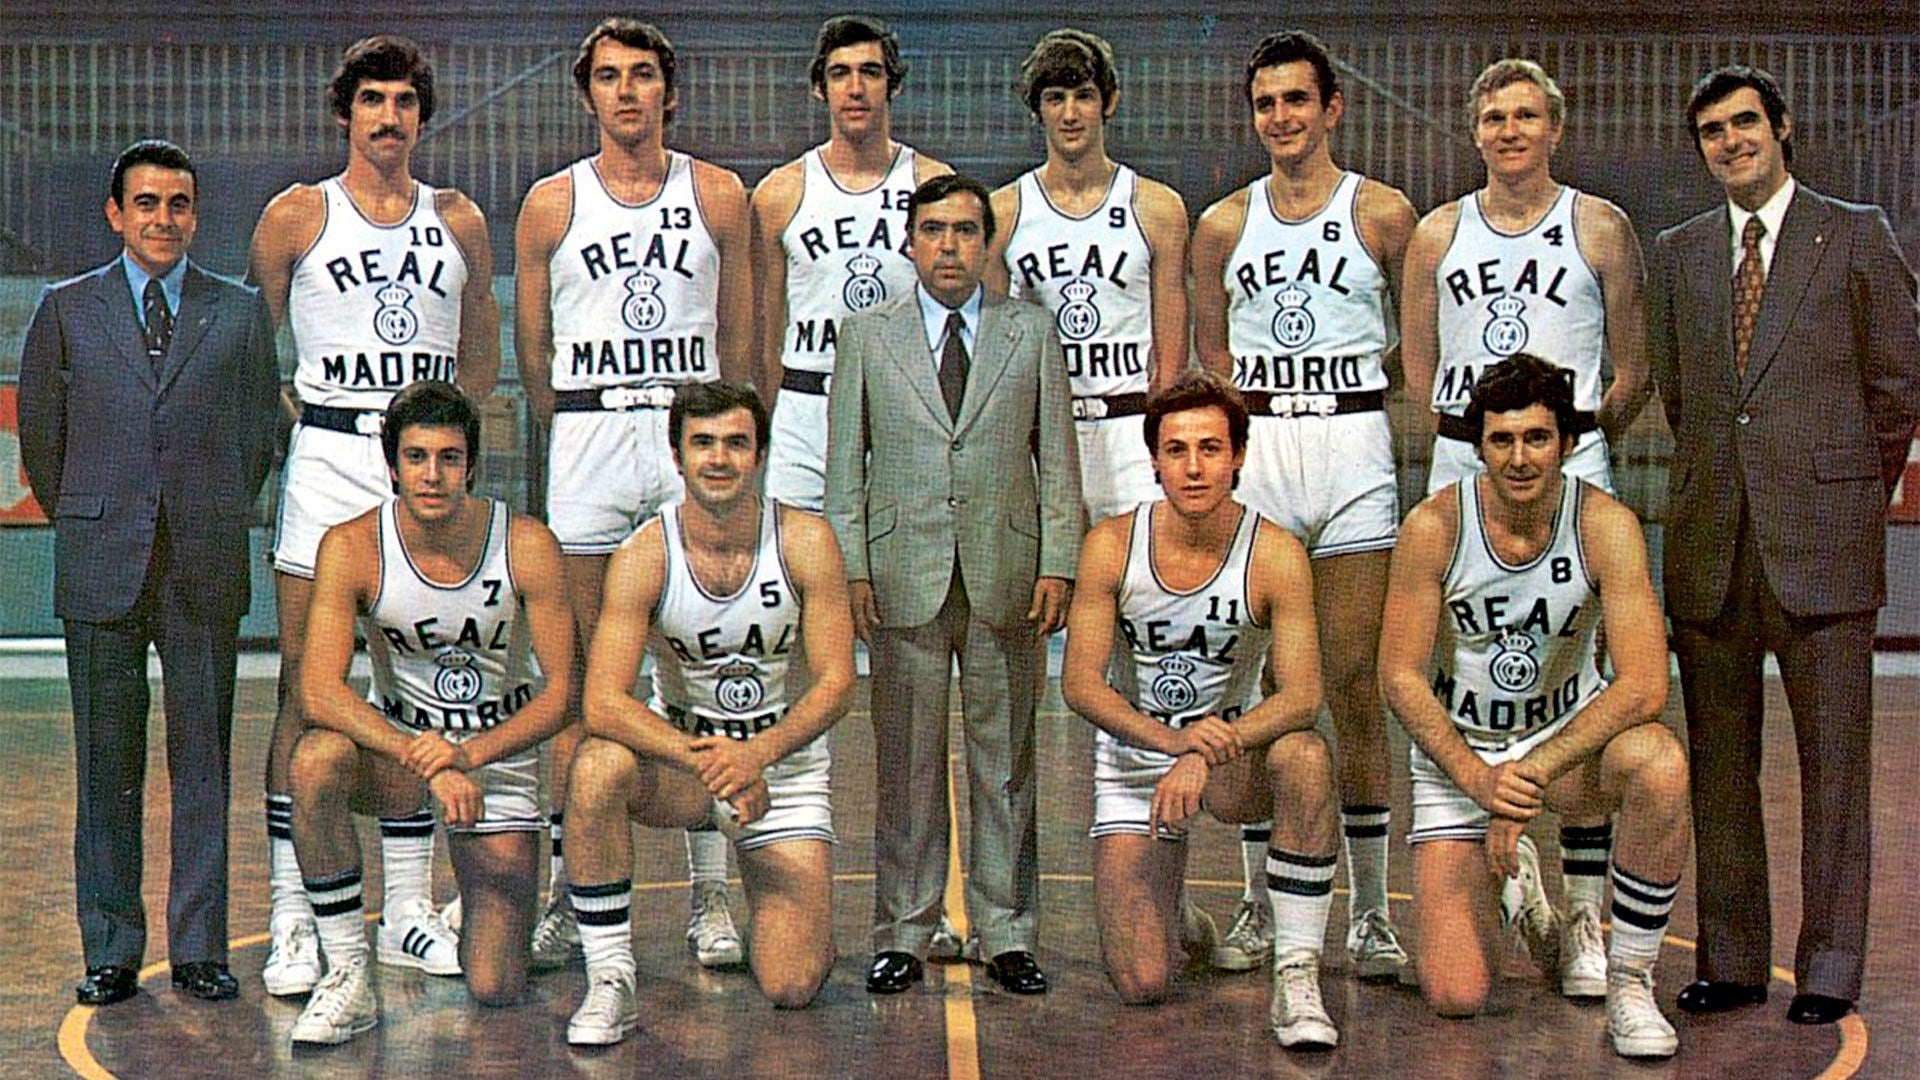 We won our 17th Spanish Basketball Cup 49 years ago